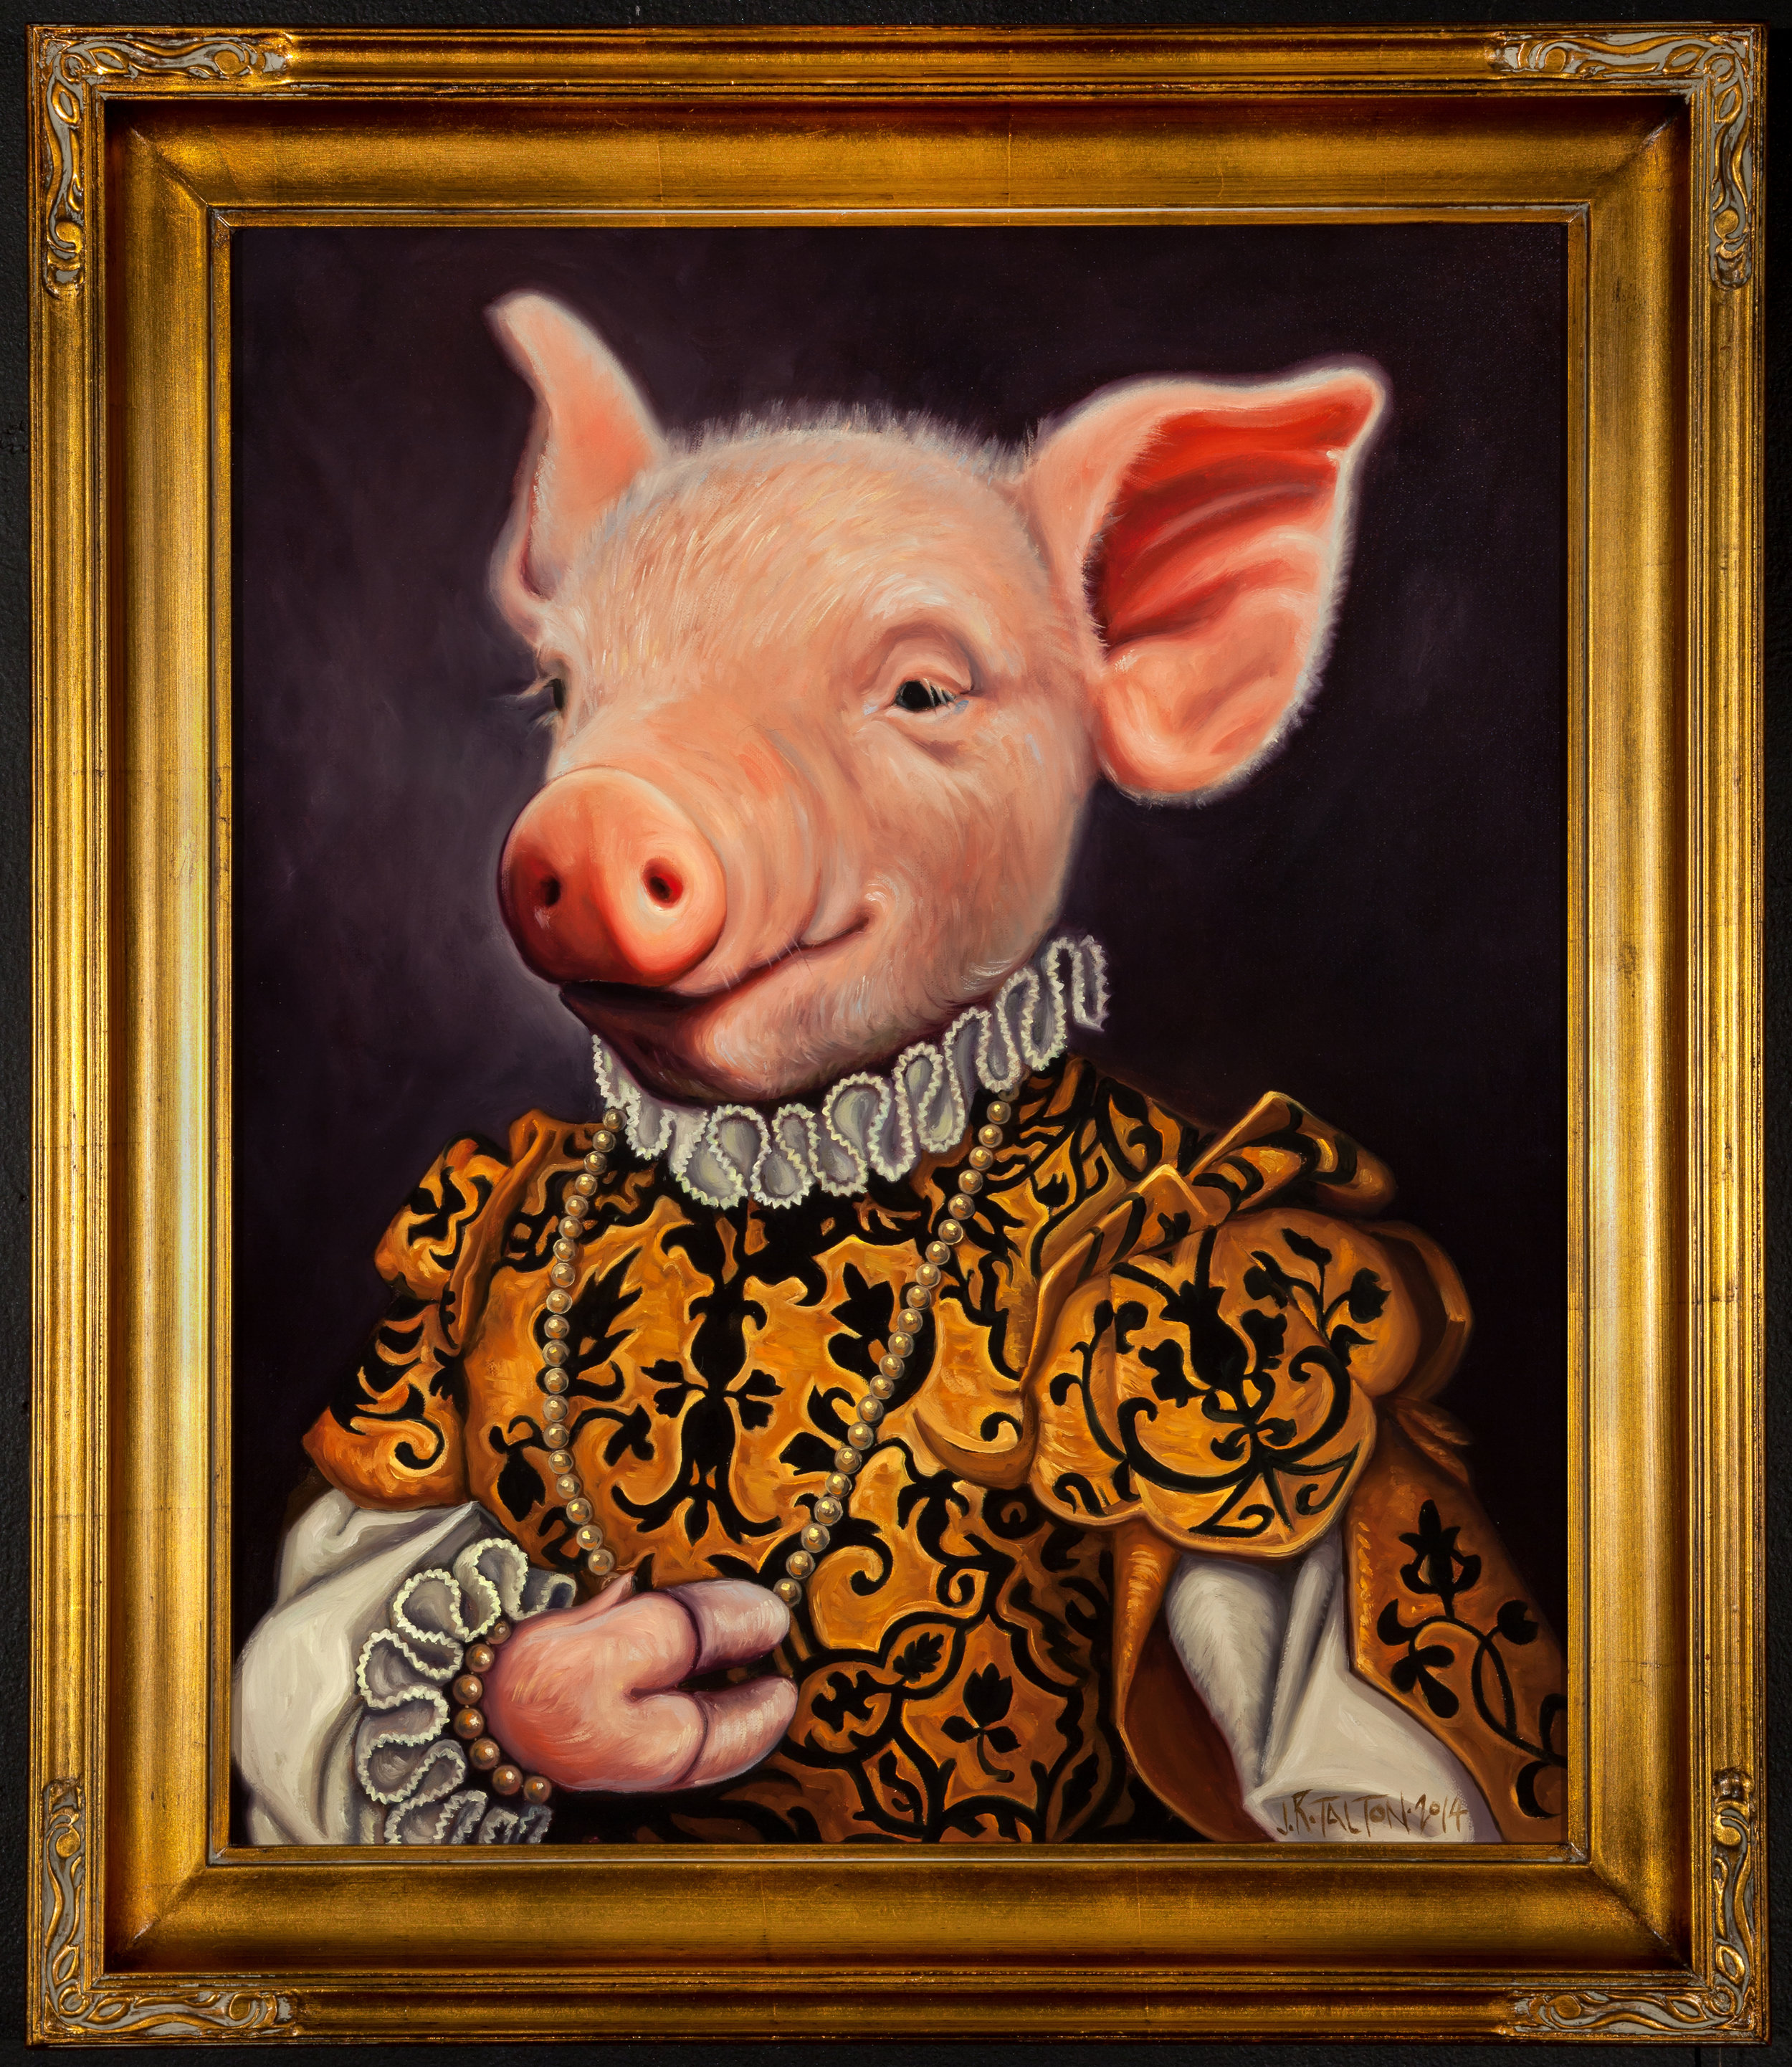 "Piglet with Pearls"